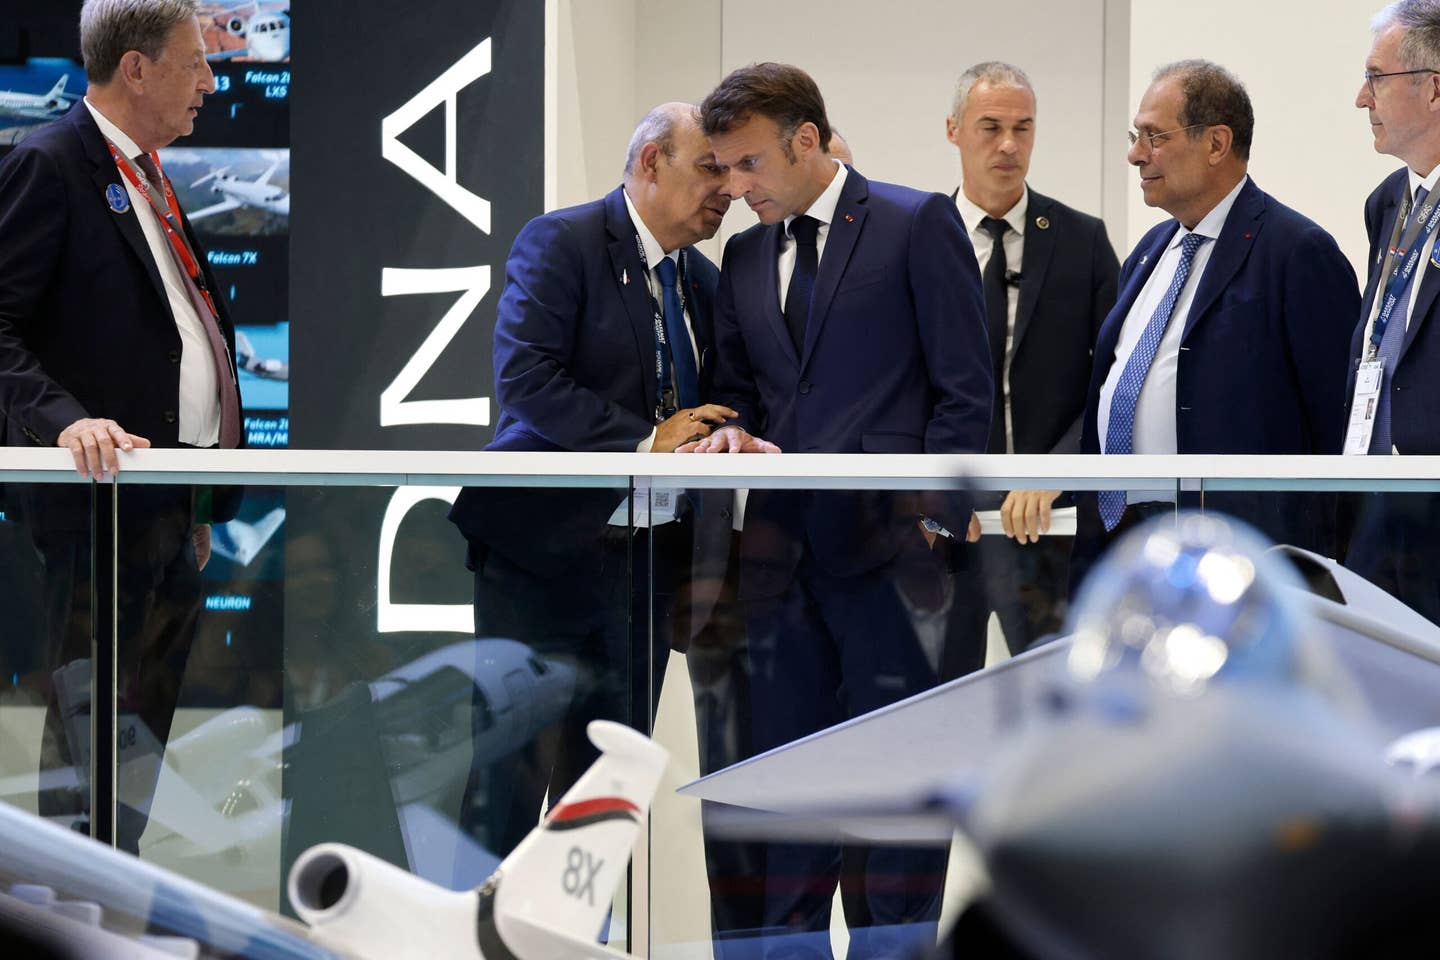 French President Emmanuel Macron speaks with Dassault Aviation CEO Eric Trappier (left), in front of a model of the Dassault Rafale, as he visits the International Paris Air Show in June 2023. <em>Photo by LUDOVIC MARIN/POOL/AFP via Getty Images</em>